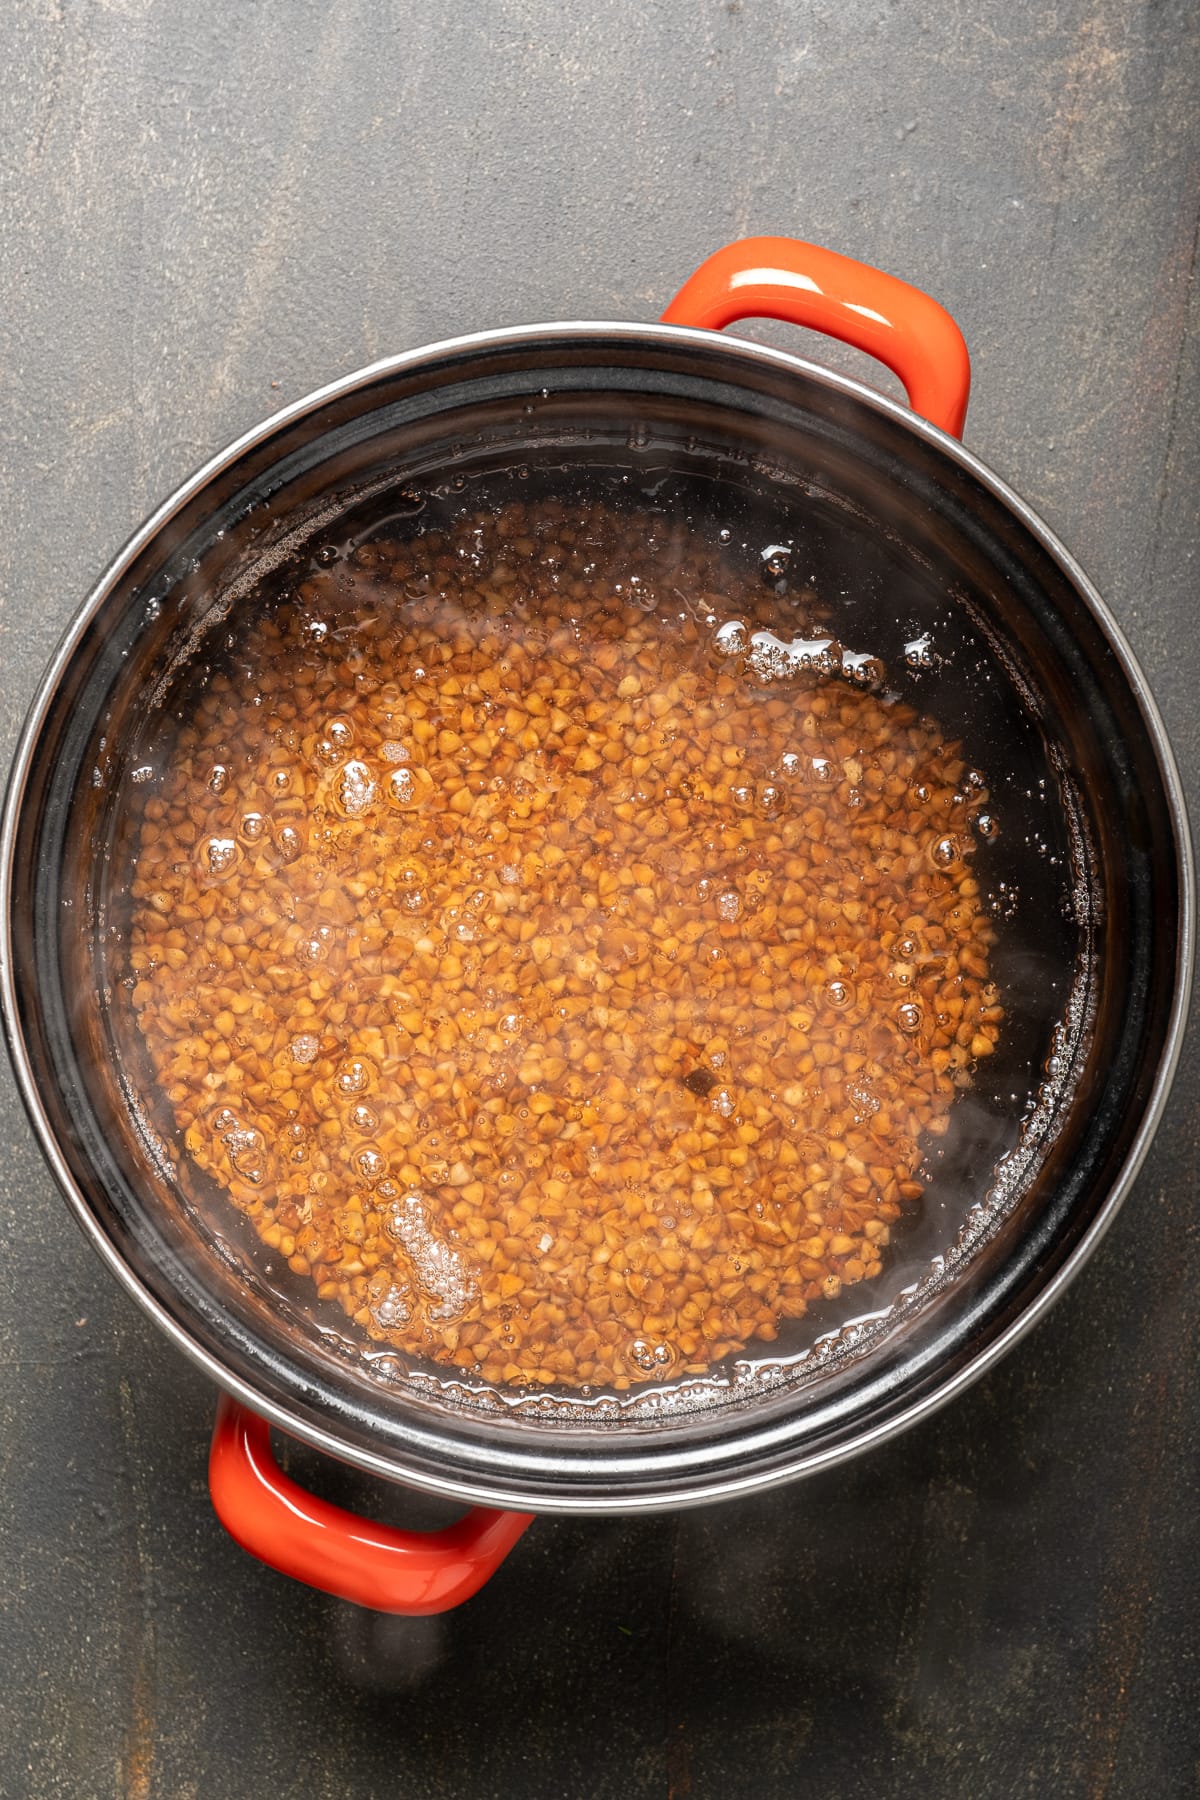 Buckwheat groats and water in a black pan with red handles.